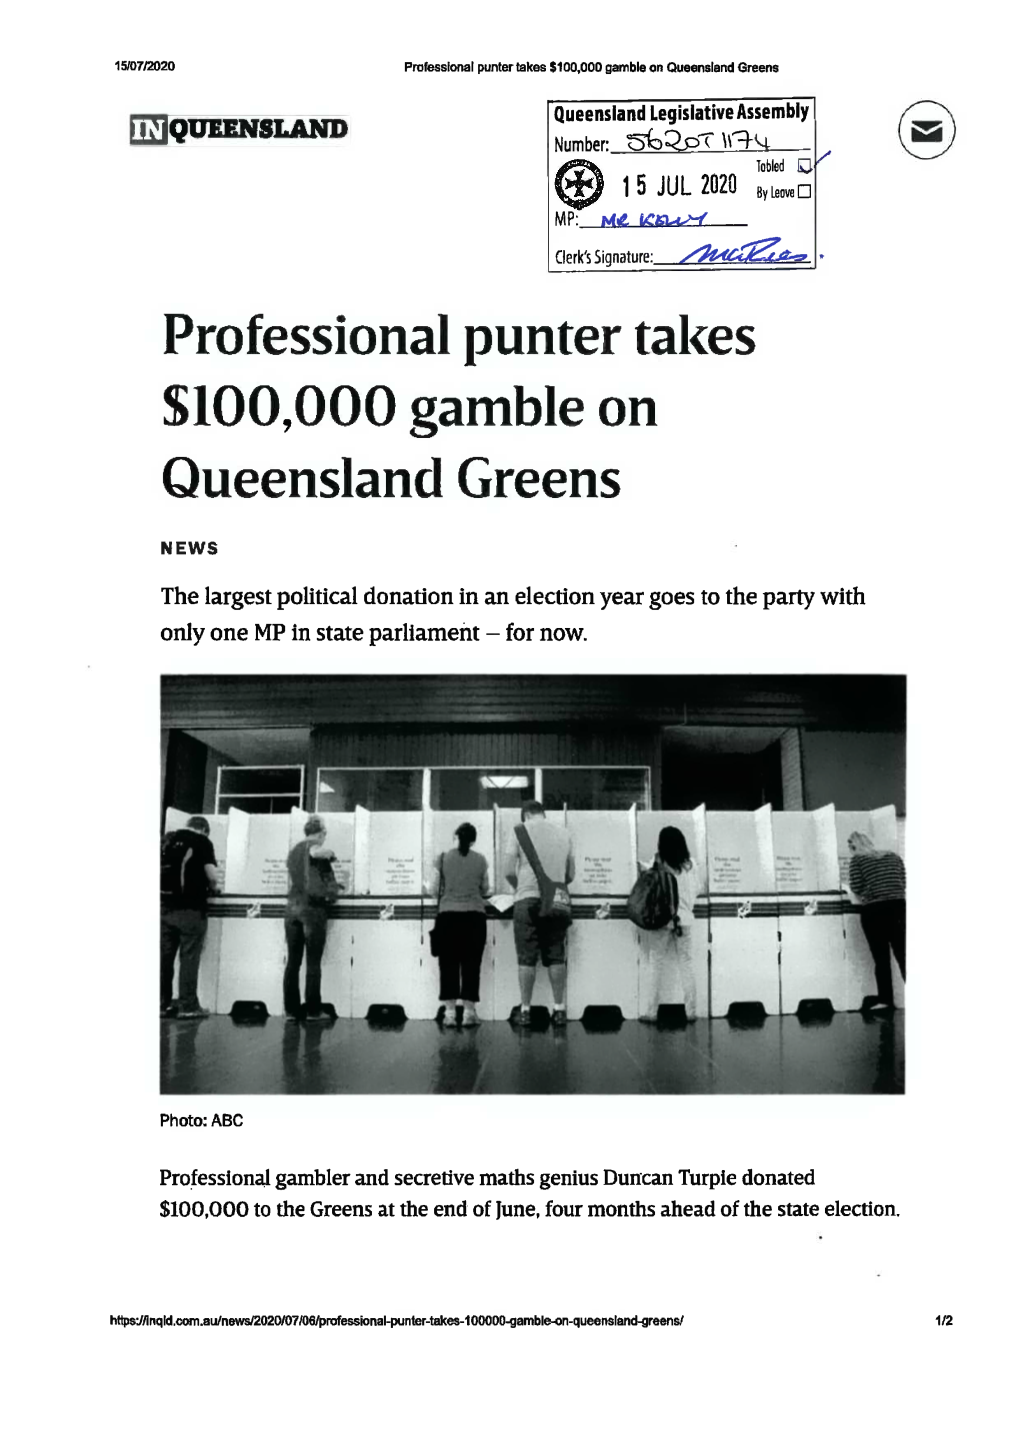 Professional Punter Takes S100,000 Gamble on Queensland Greens